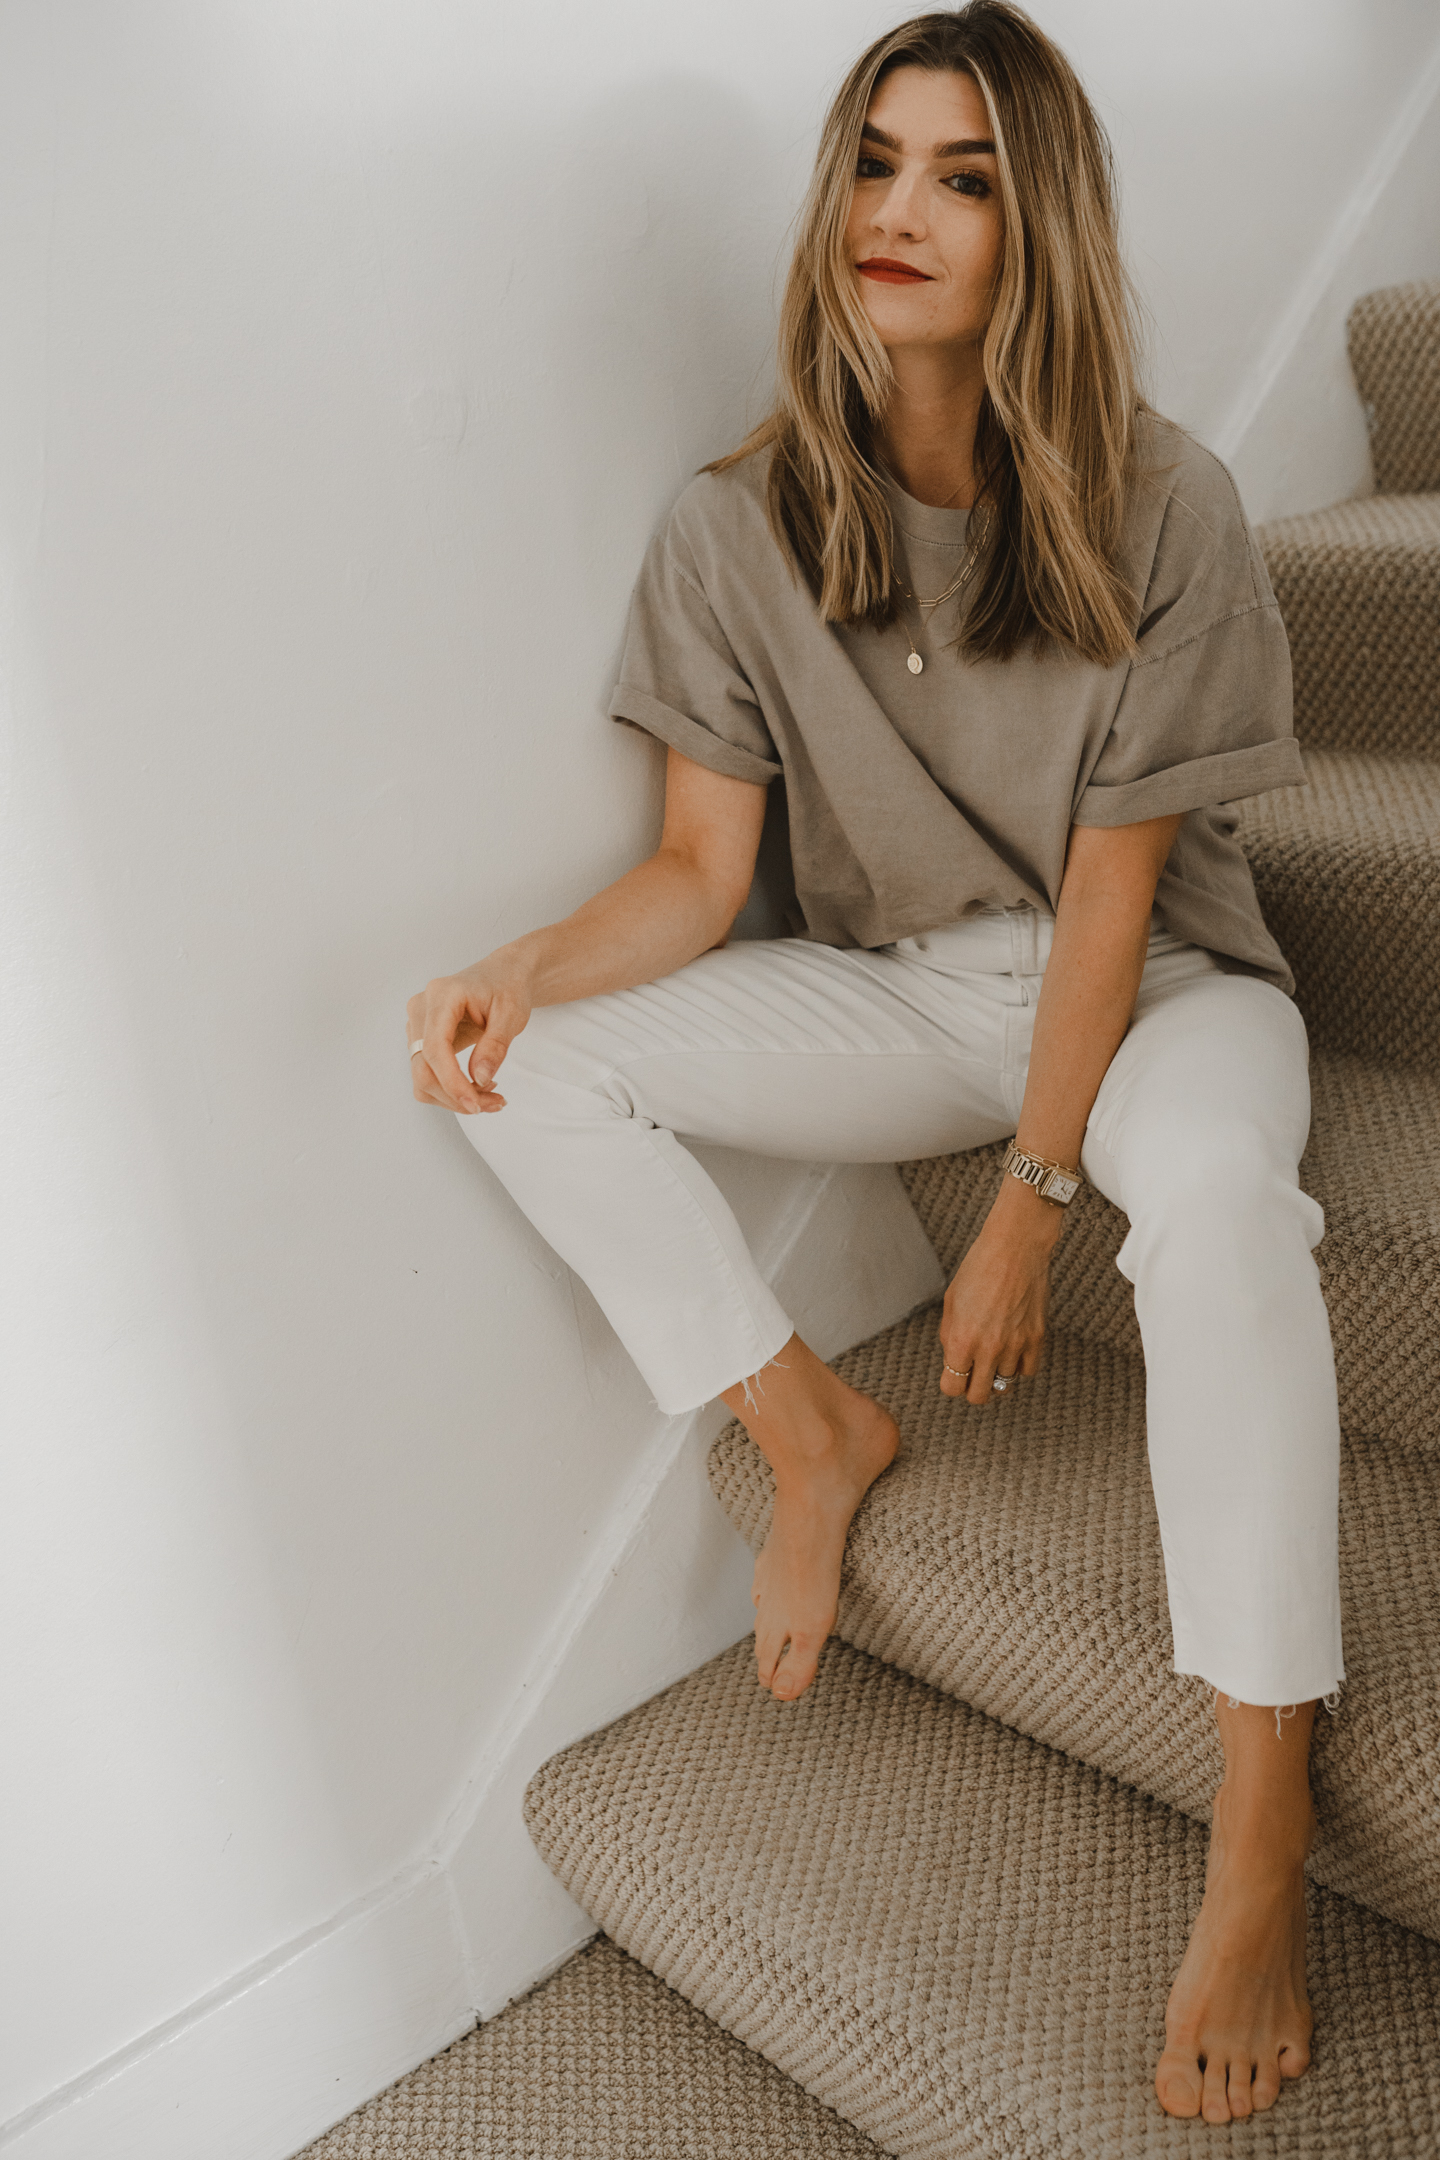 The Grey Edit - Cortney Bigelow - Seattle Lifestyle Blogger - At Home Casual Style-Pipe + Row Tee-Madewell White Jeans-Stairwell